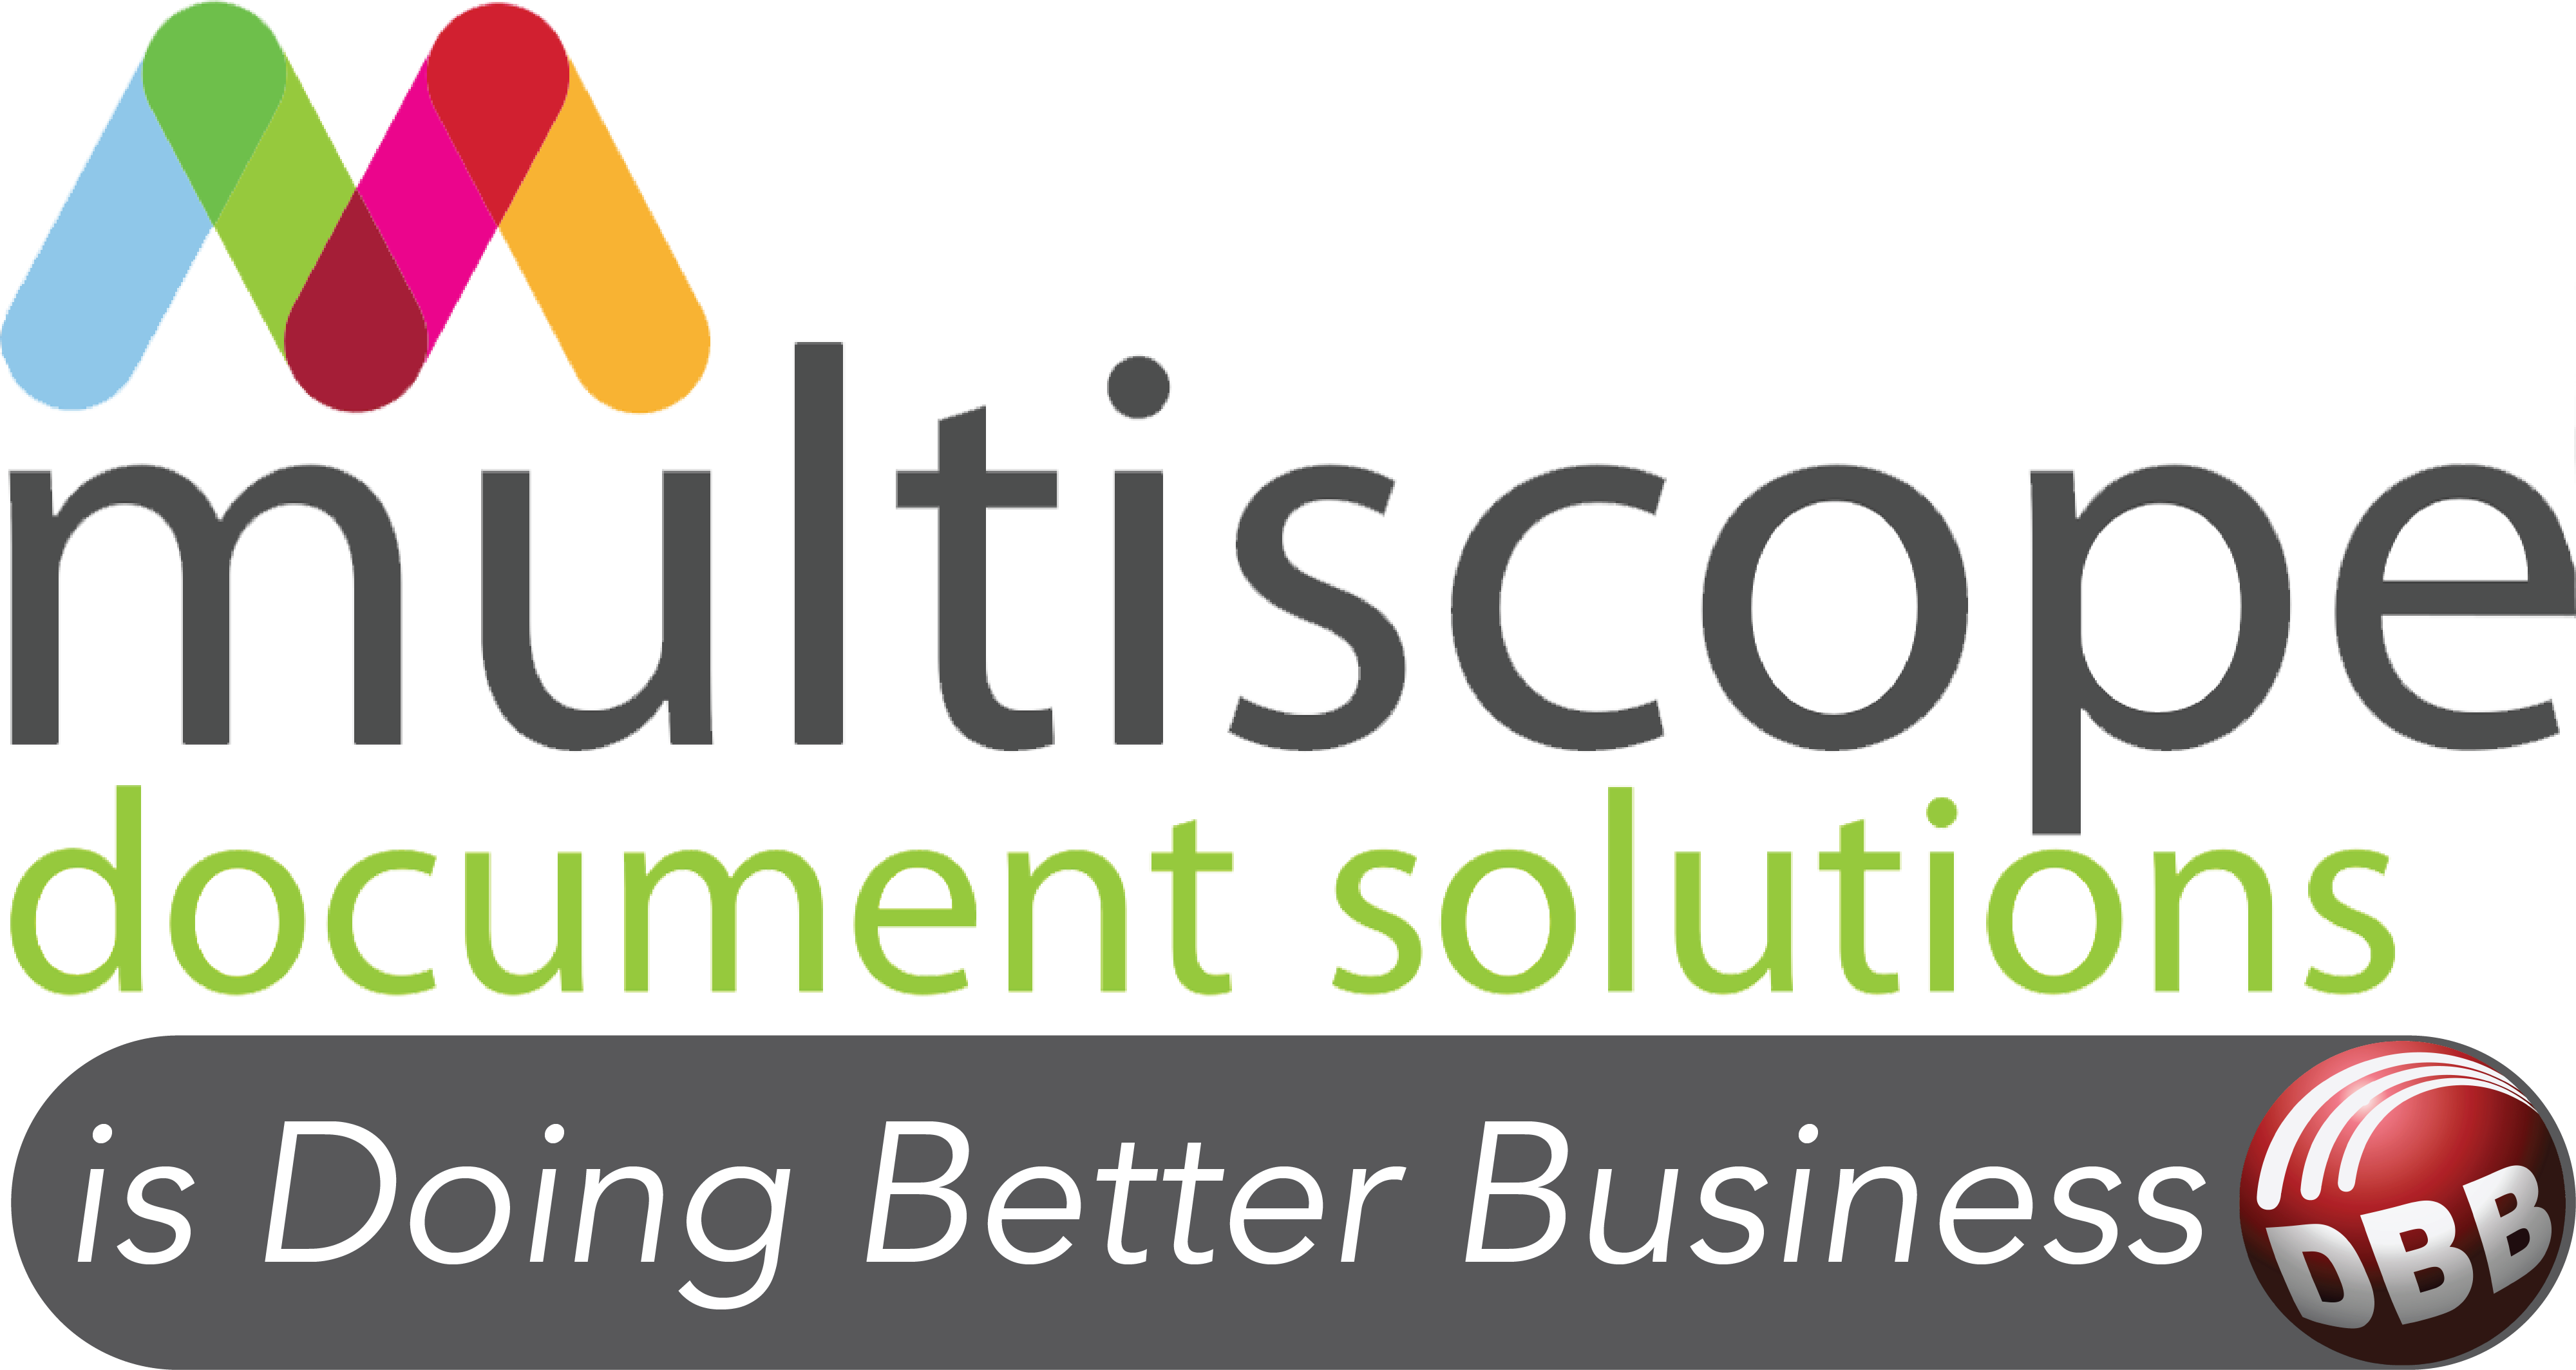 DBB Welcomes Multiscope Document Solutions to the DBB Family